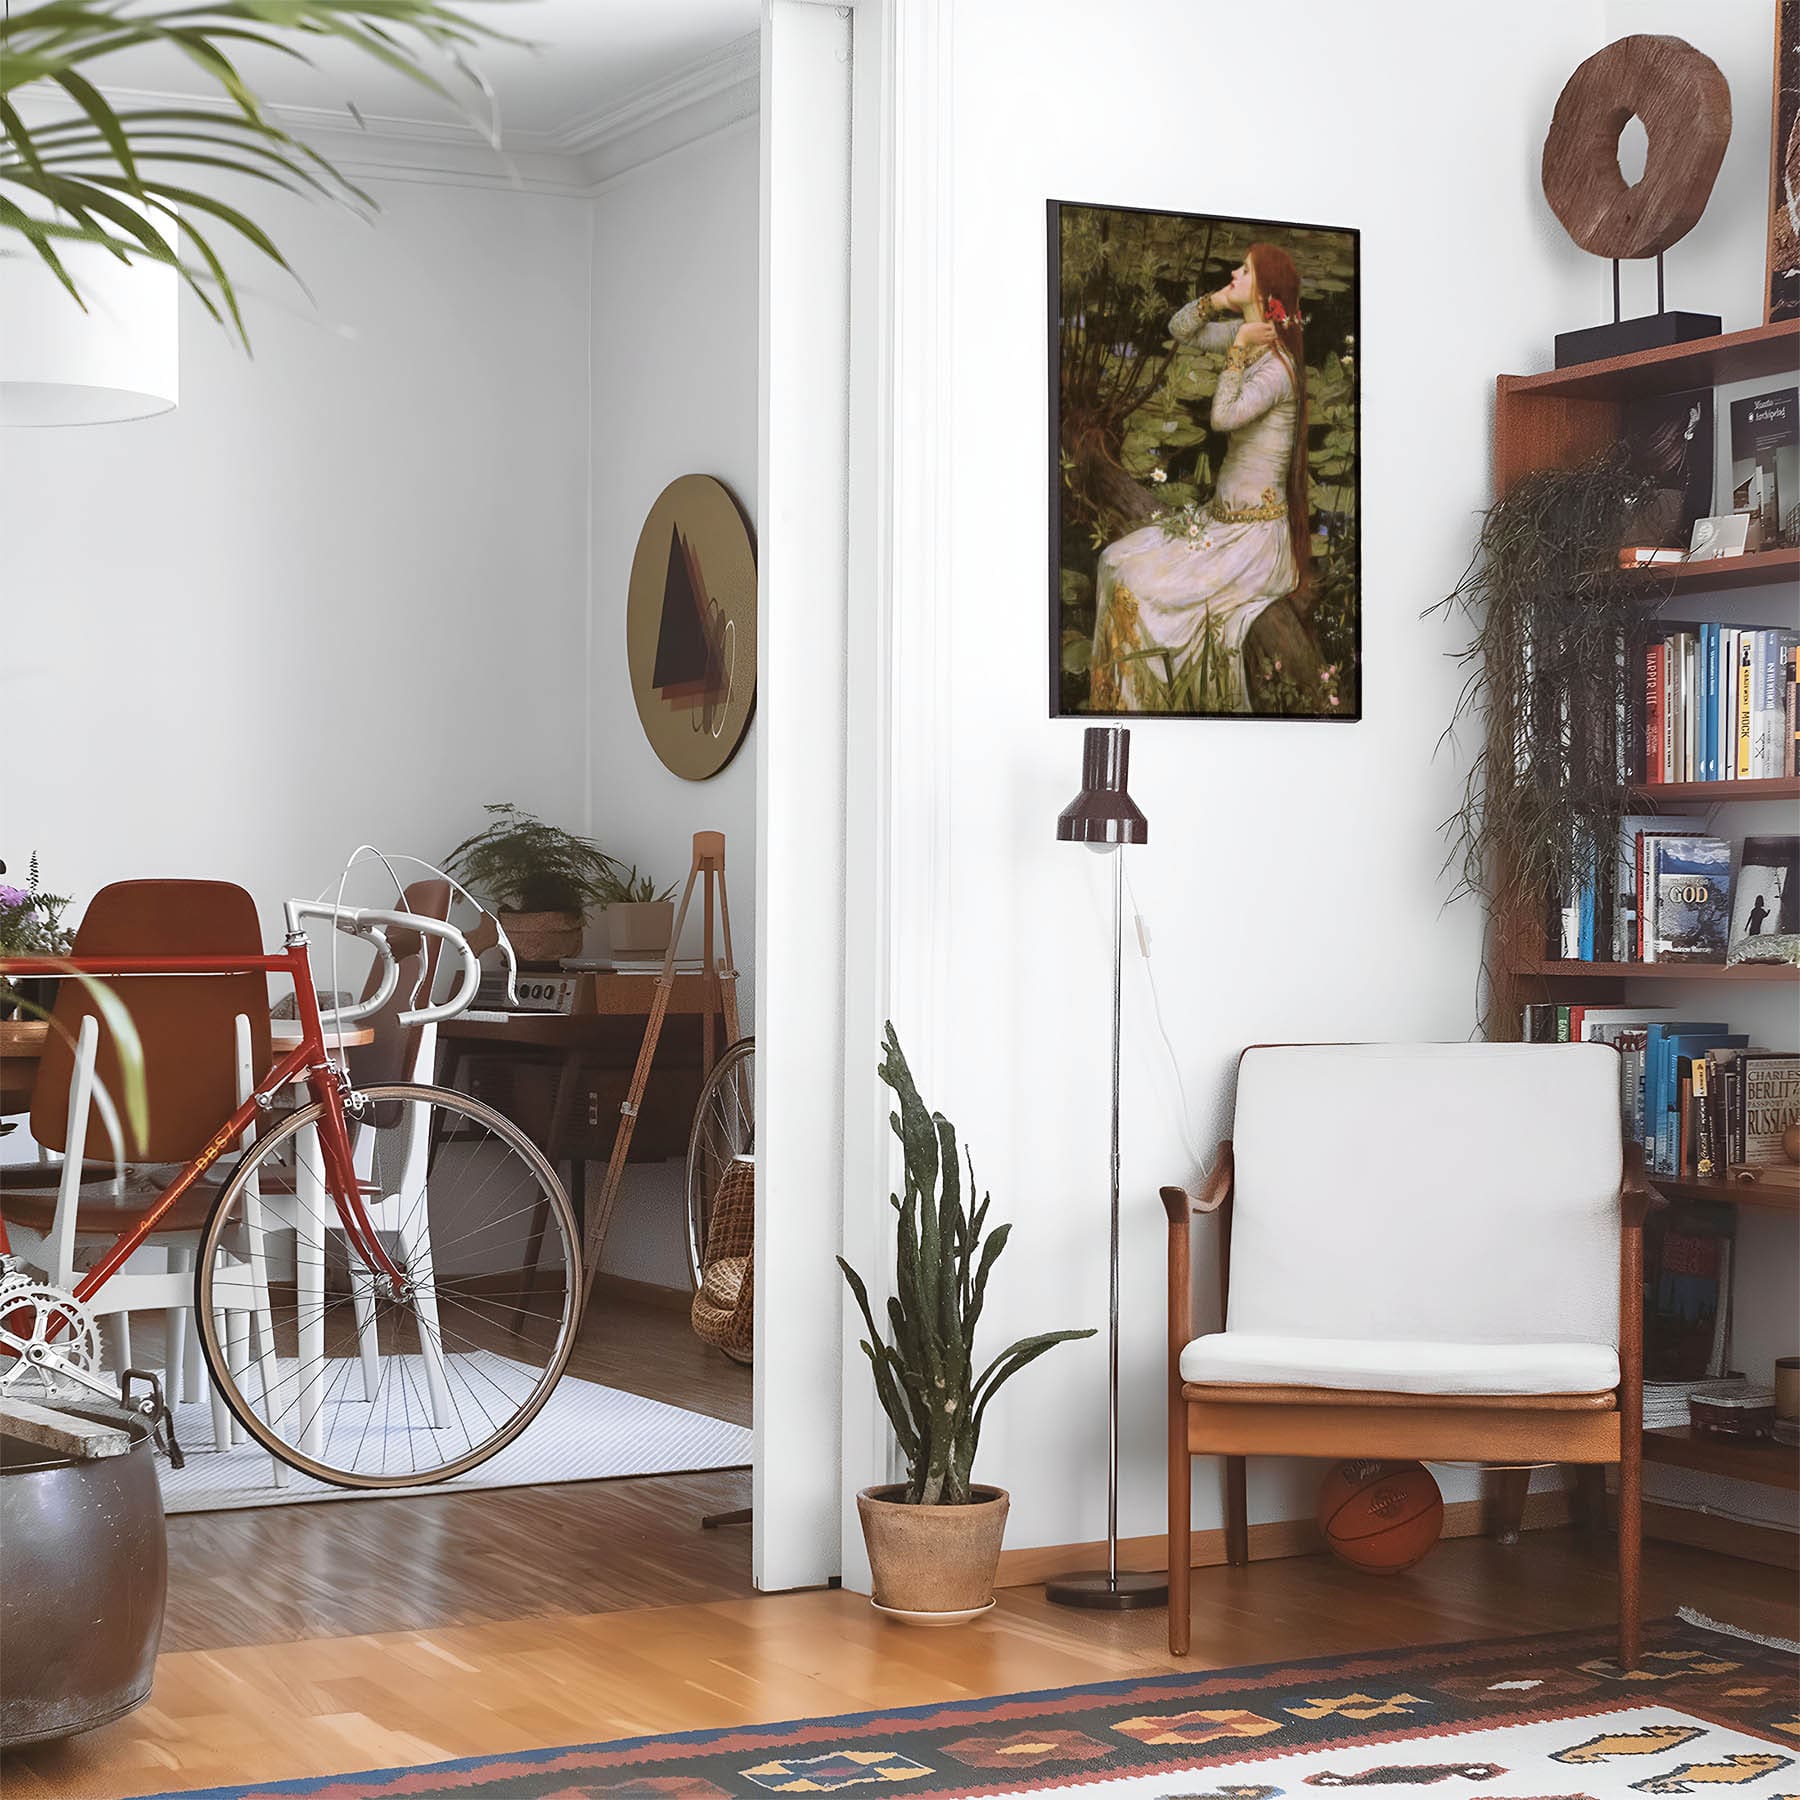 Eclectic living room with a road bike, bookshelf and house plants that features framed artwork of a Girl with Red Hair and White Dress above a chair and lamp